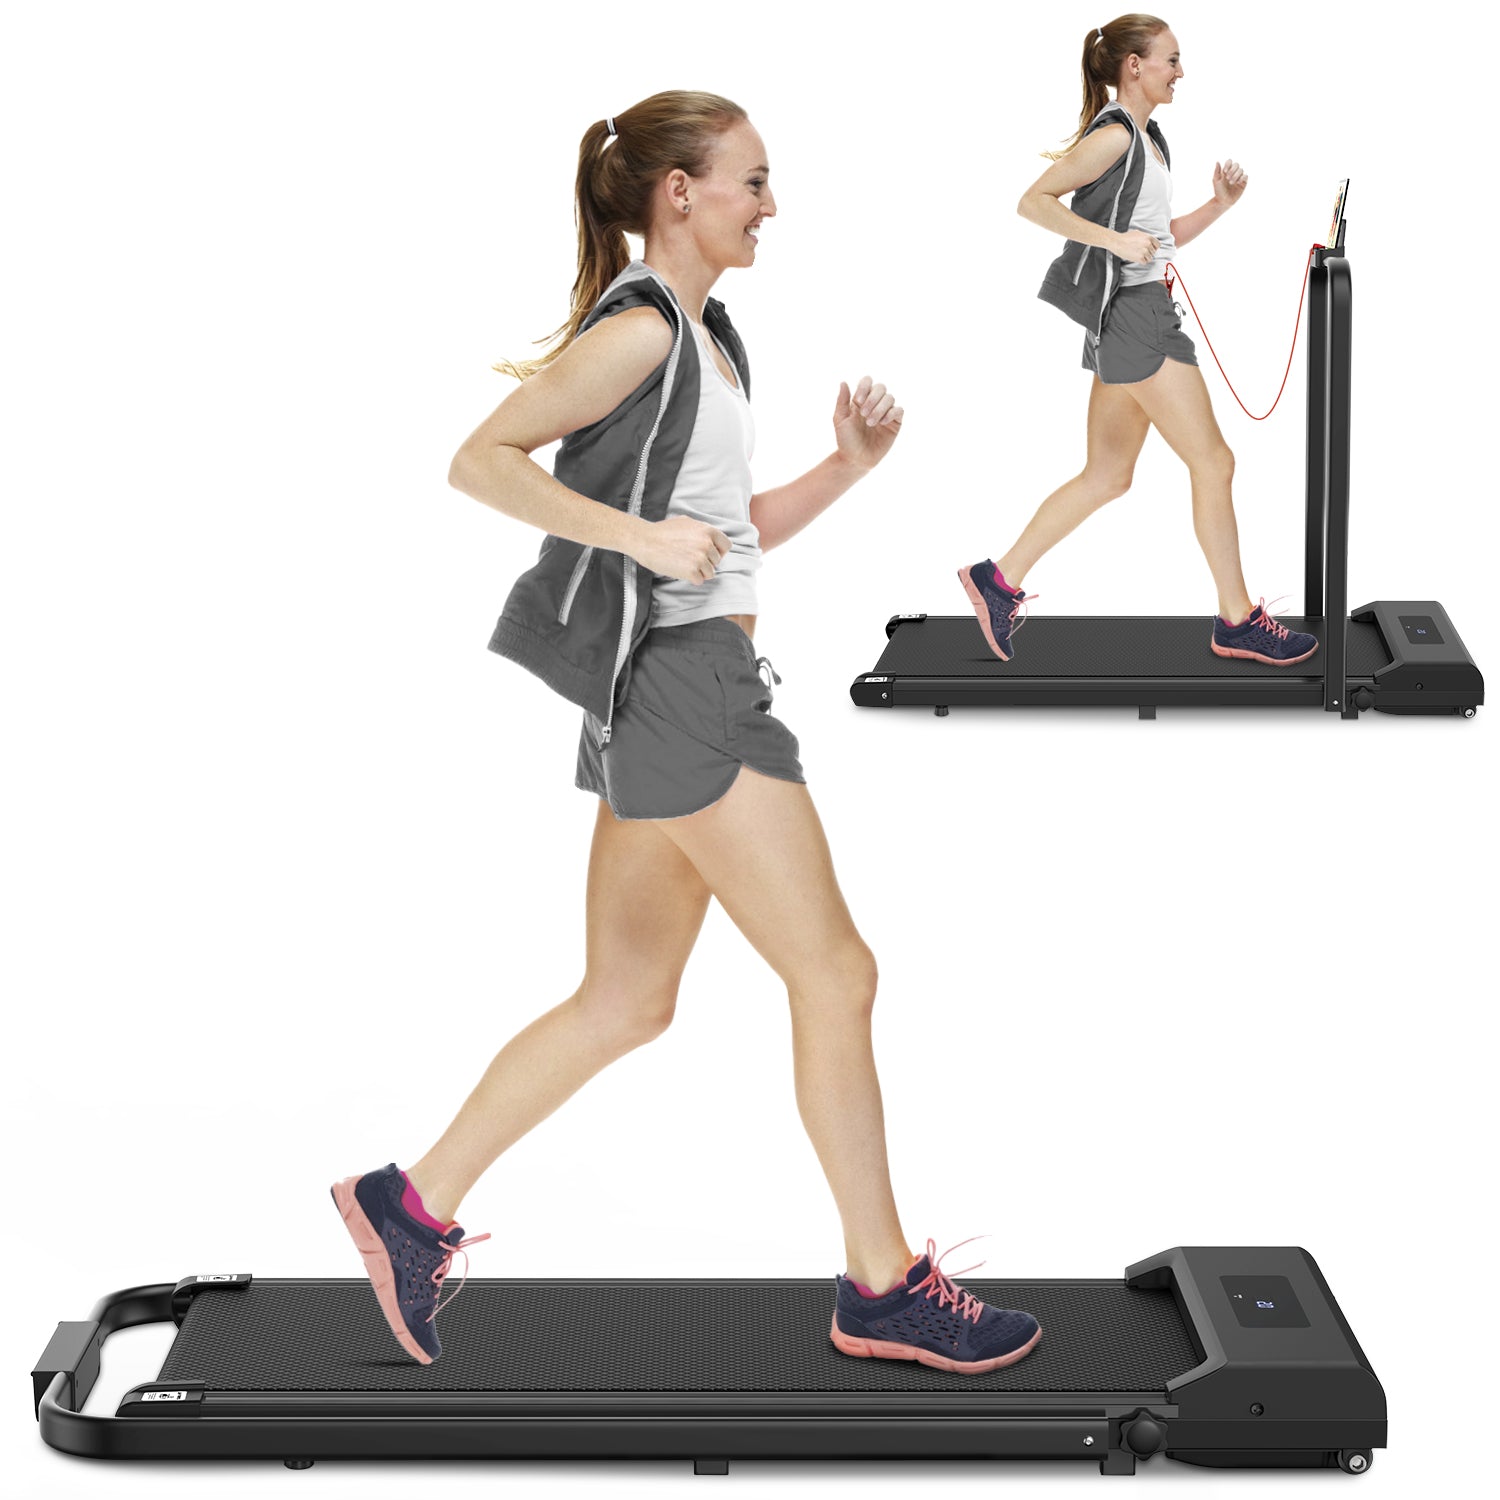 2 in 1 Under Desk Treadmill, 2.5HP Folding Electric Treadmill Walking  Jogging Machine for Home Office with Remote Control, Black